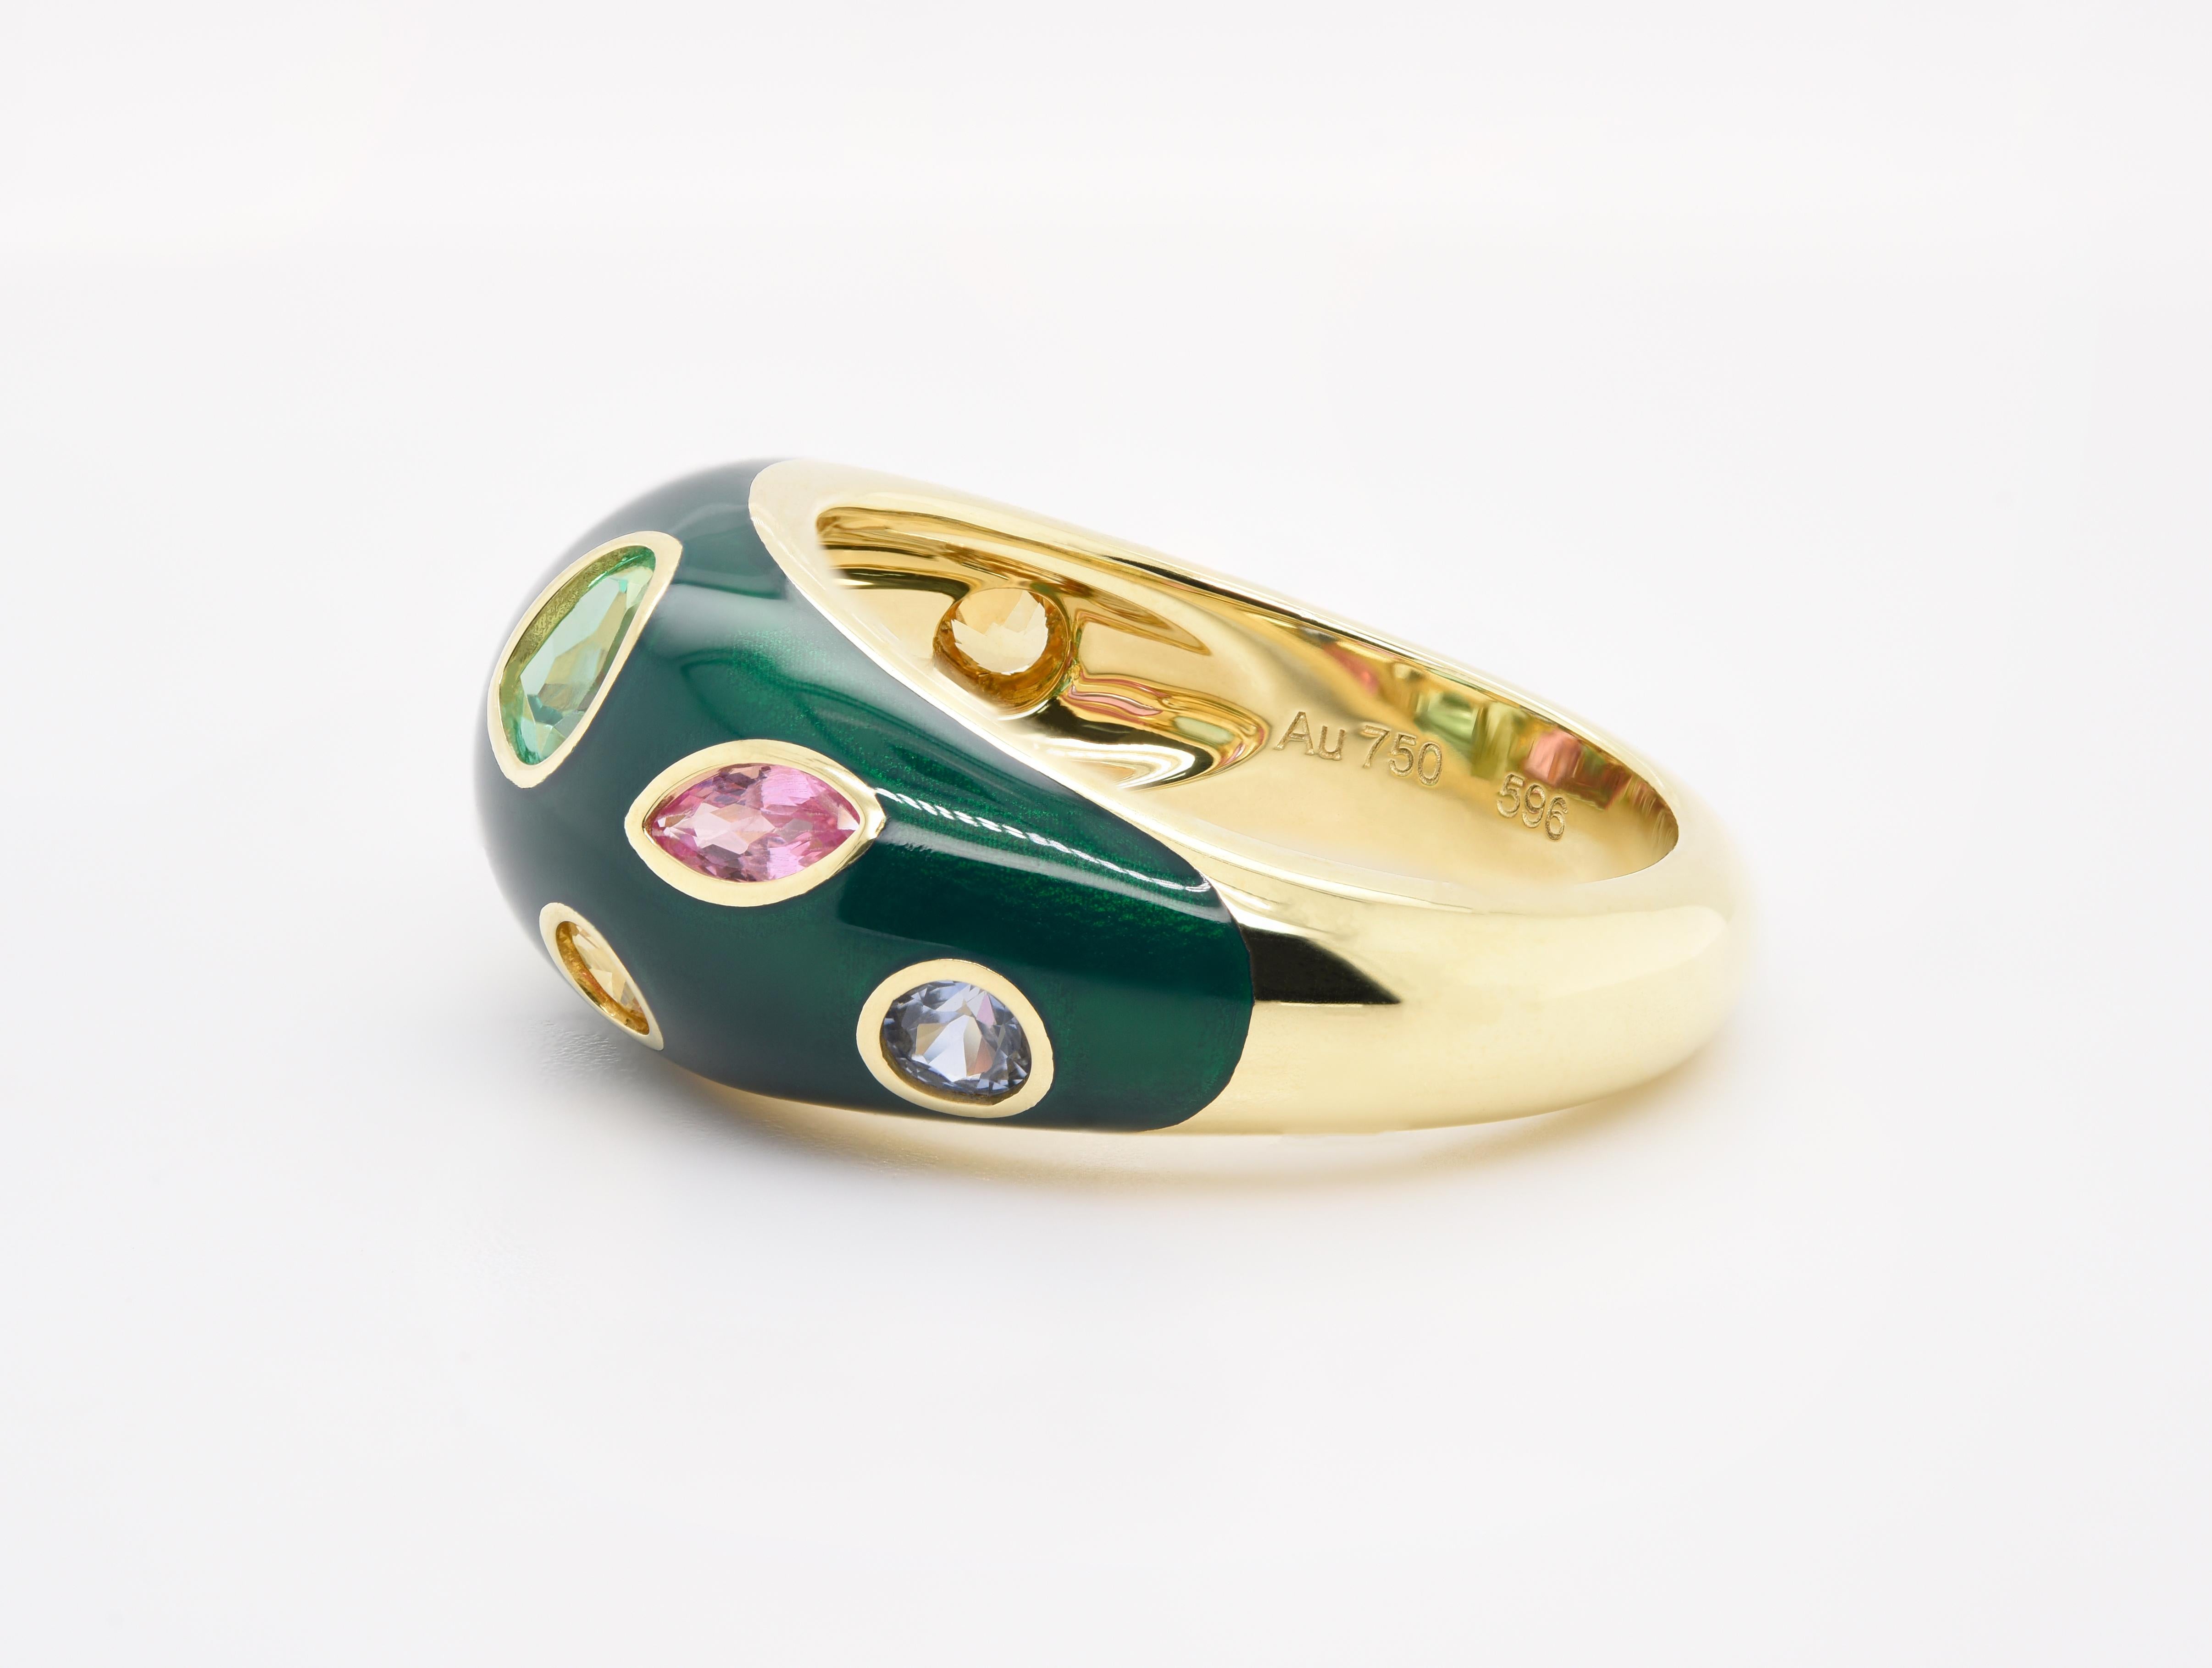 JAG New York created the one of a kind Green Ceramic Dome Ring with Sapphires, Emeralds, Peridot & Tourmaline with a total gem weight of 2.20 carats and made in 9.90 grams of 18K Yellow Gold. We can create a Dome Ring in your choice of colored